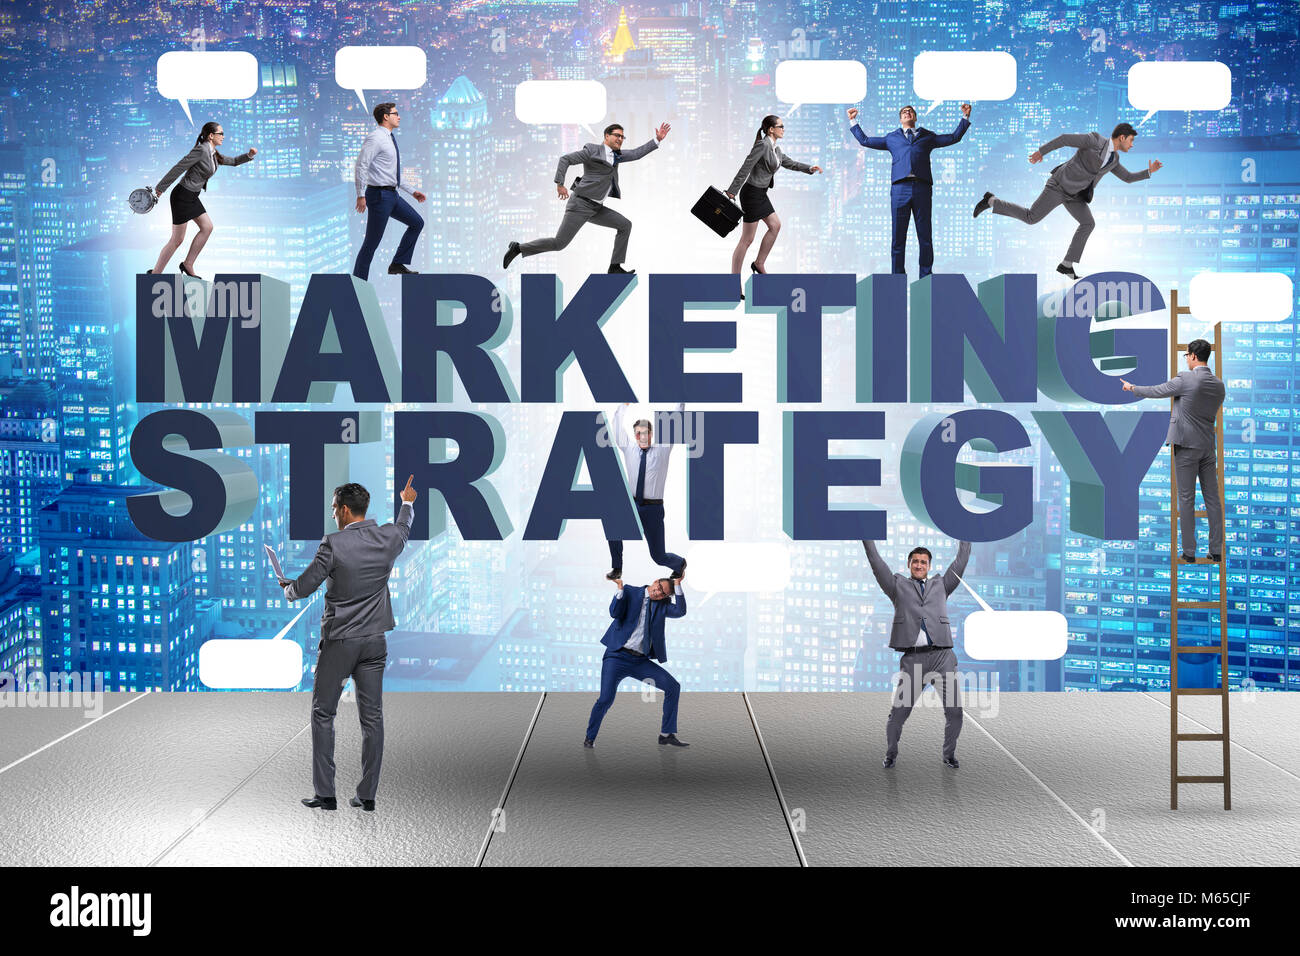 Marketing strategy concept with businessman and team Stock Photo